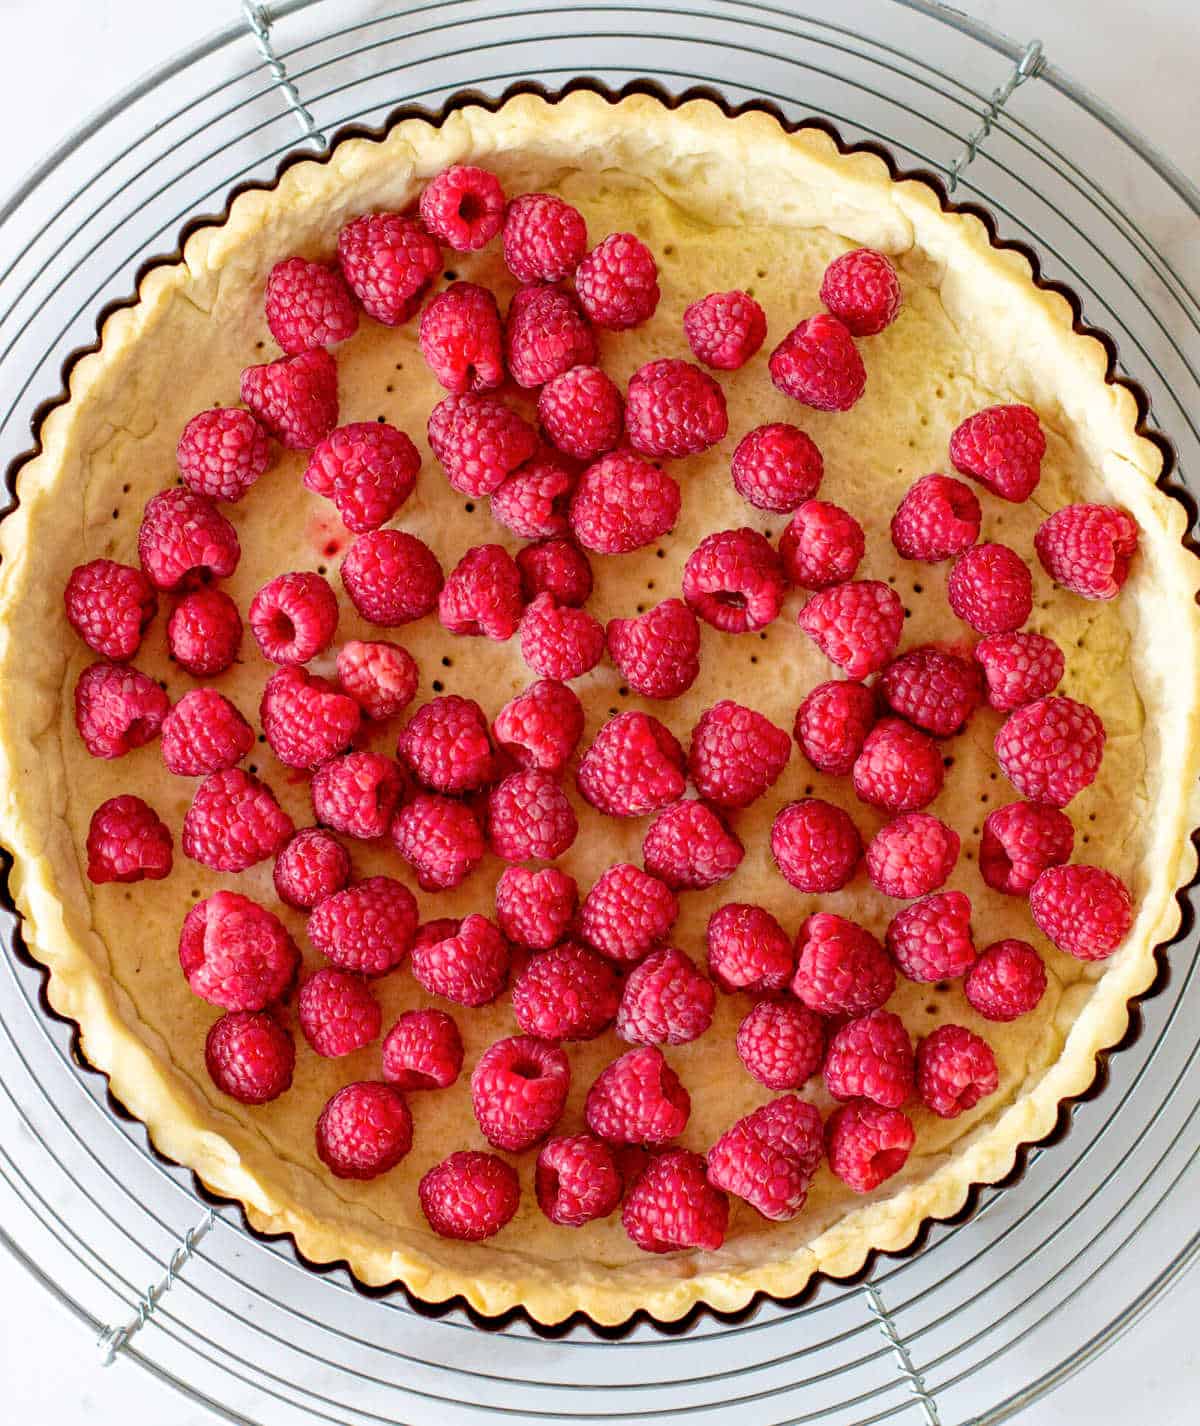 Fresh raspberries in a tart shell on a wire rack on a white marble surface.